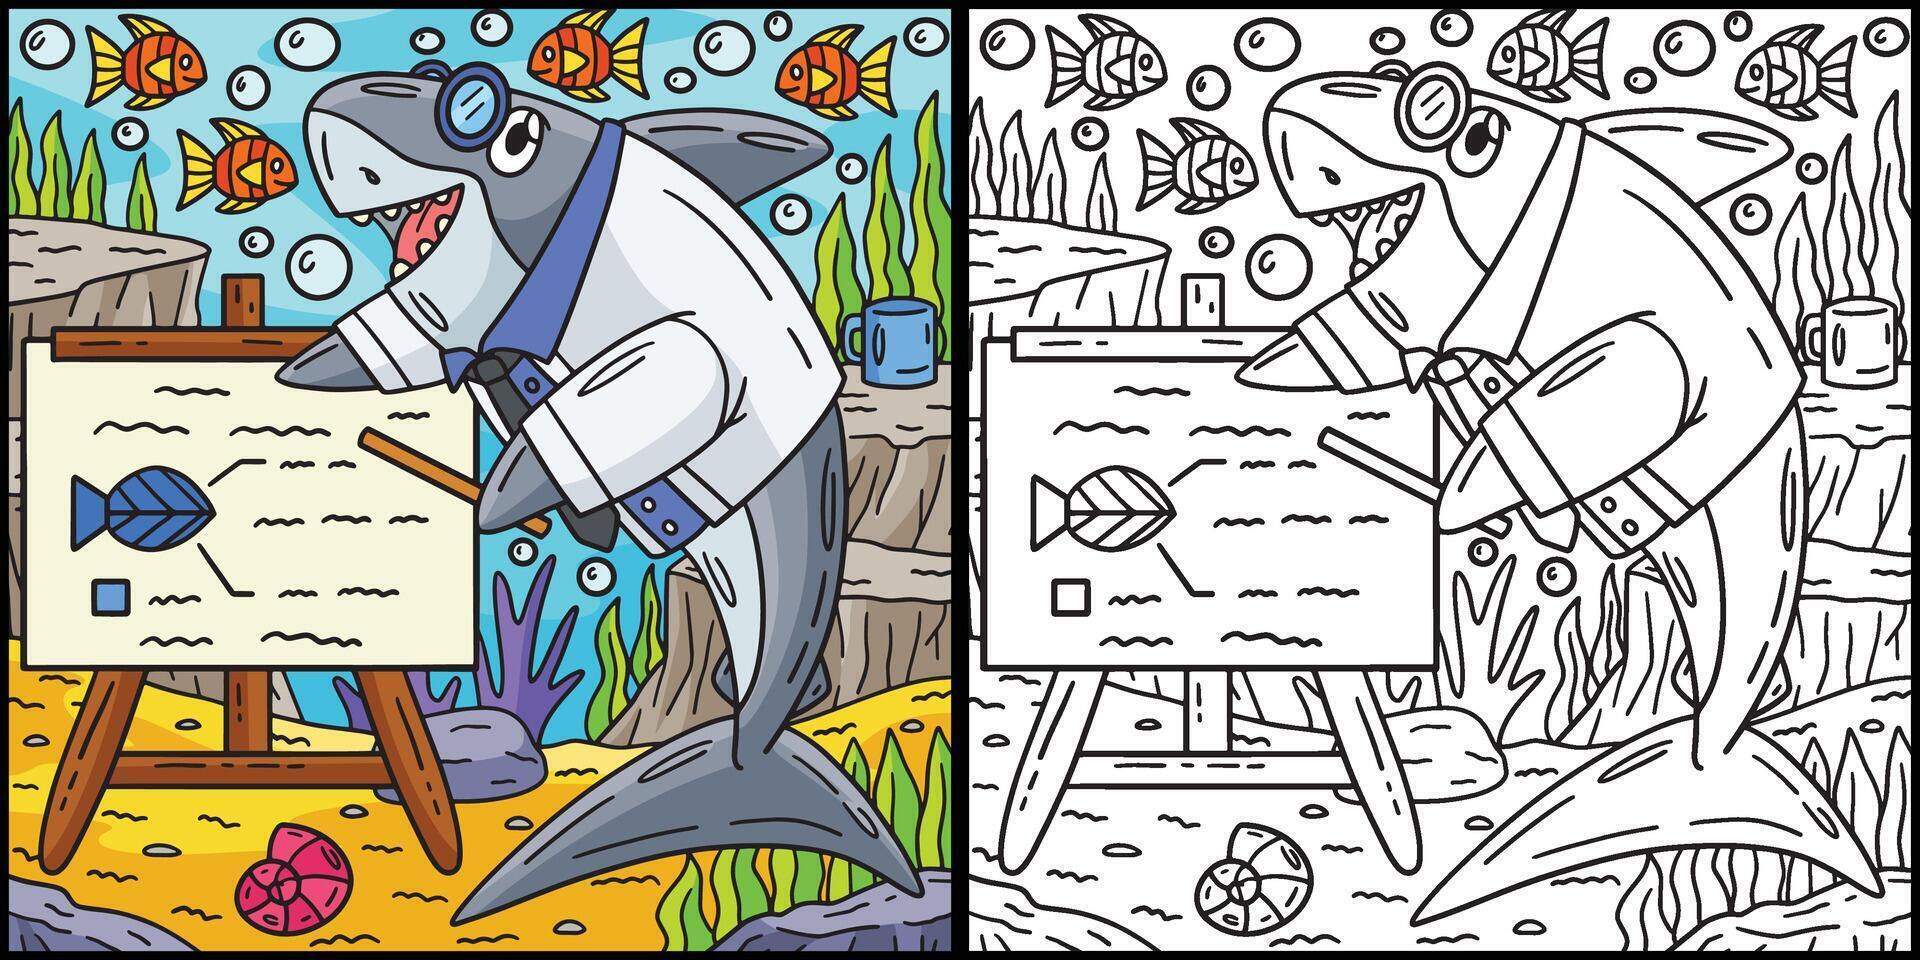 Professor Shark Coloring Page Colored Illustration vector